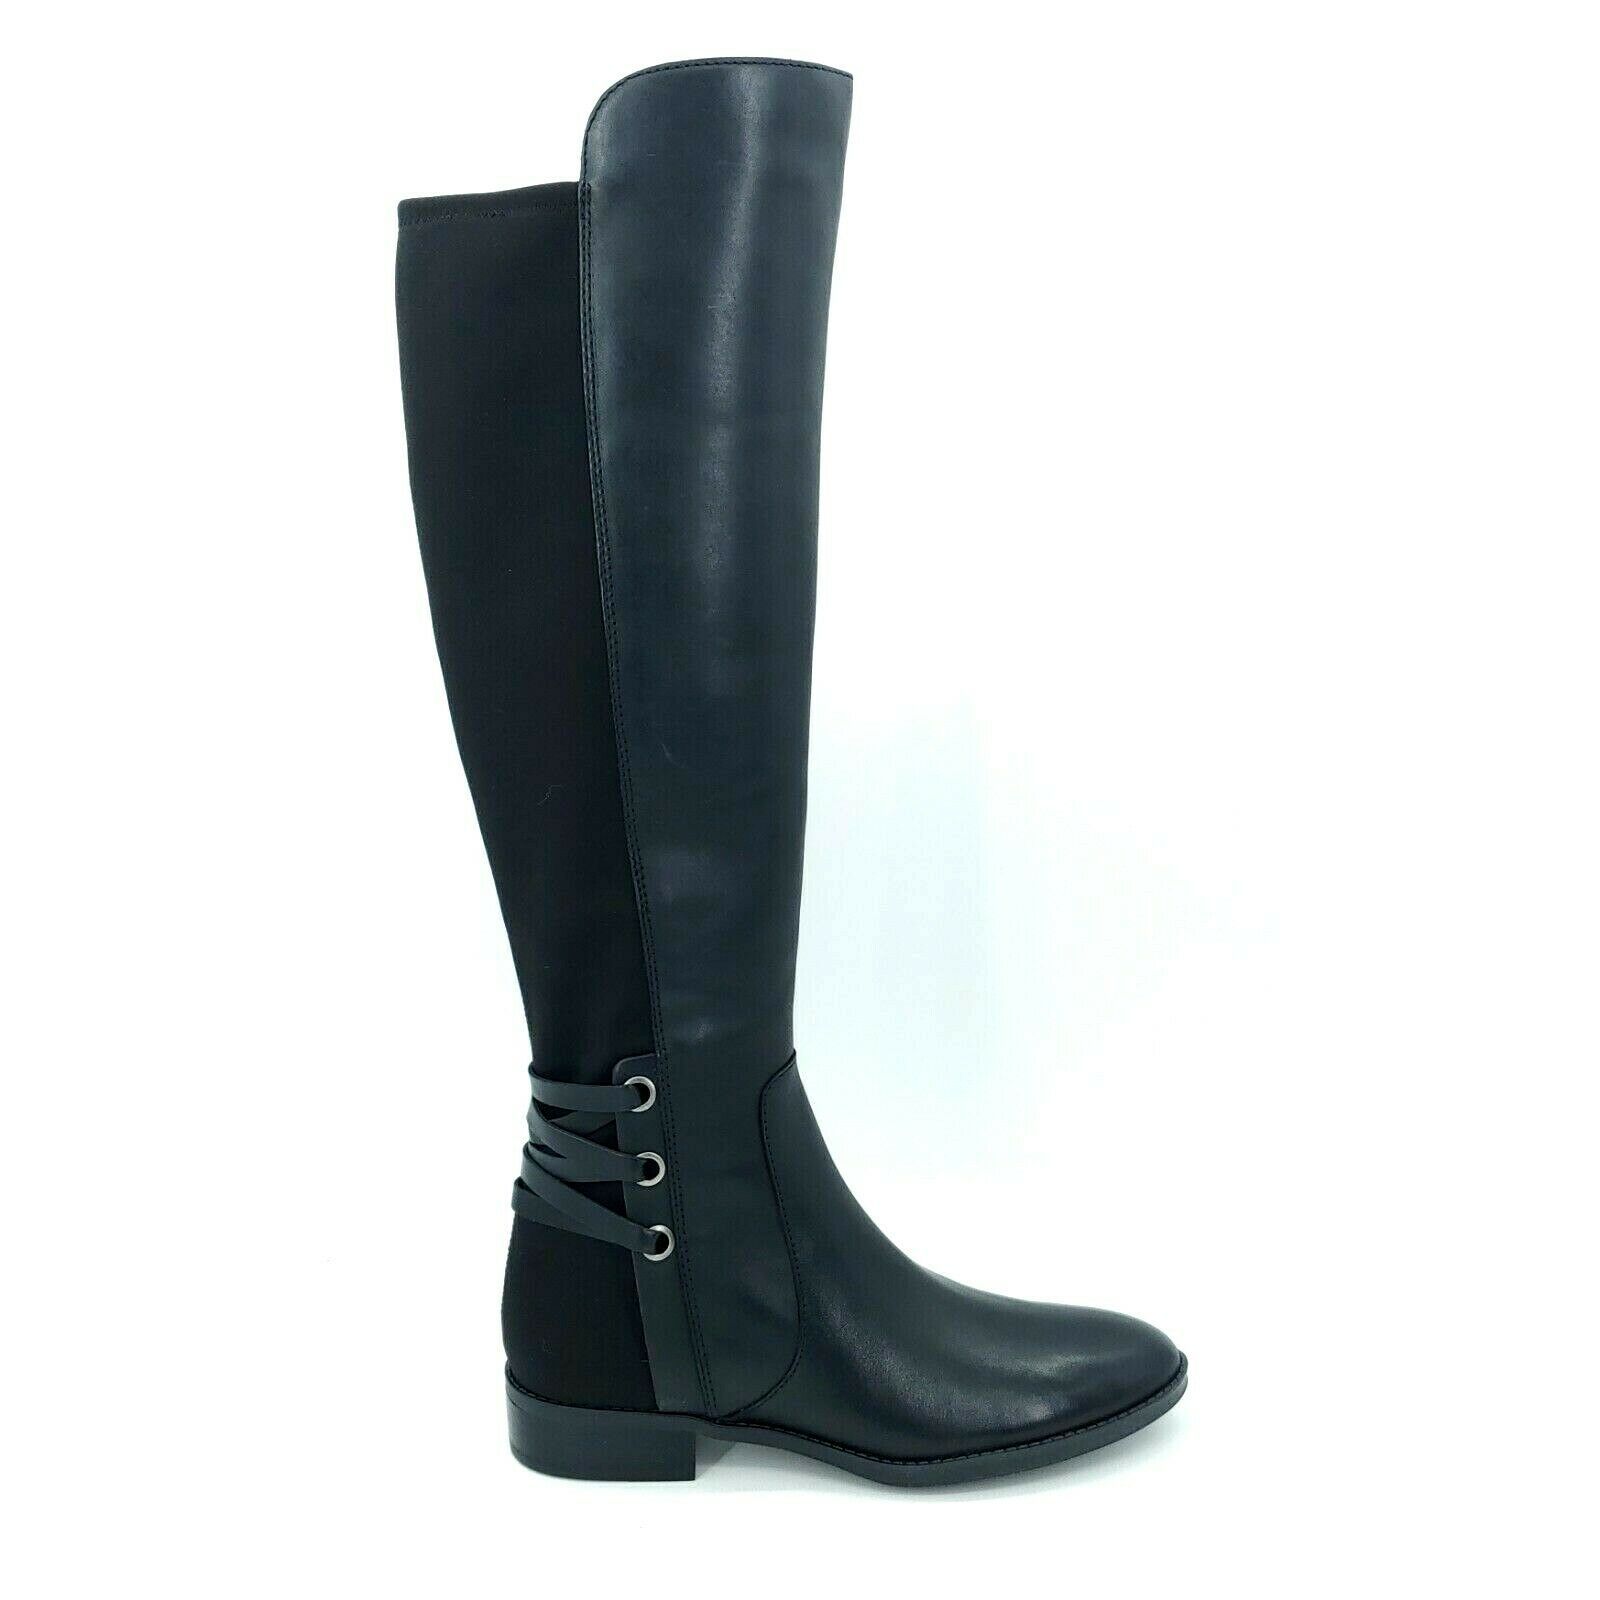 Vince Camuto Womens Paulette Knee High Leather Soft Calf Riding Boots Black 6.5M